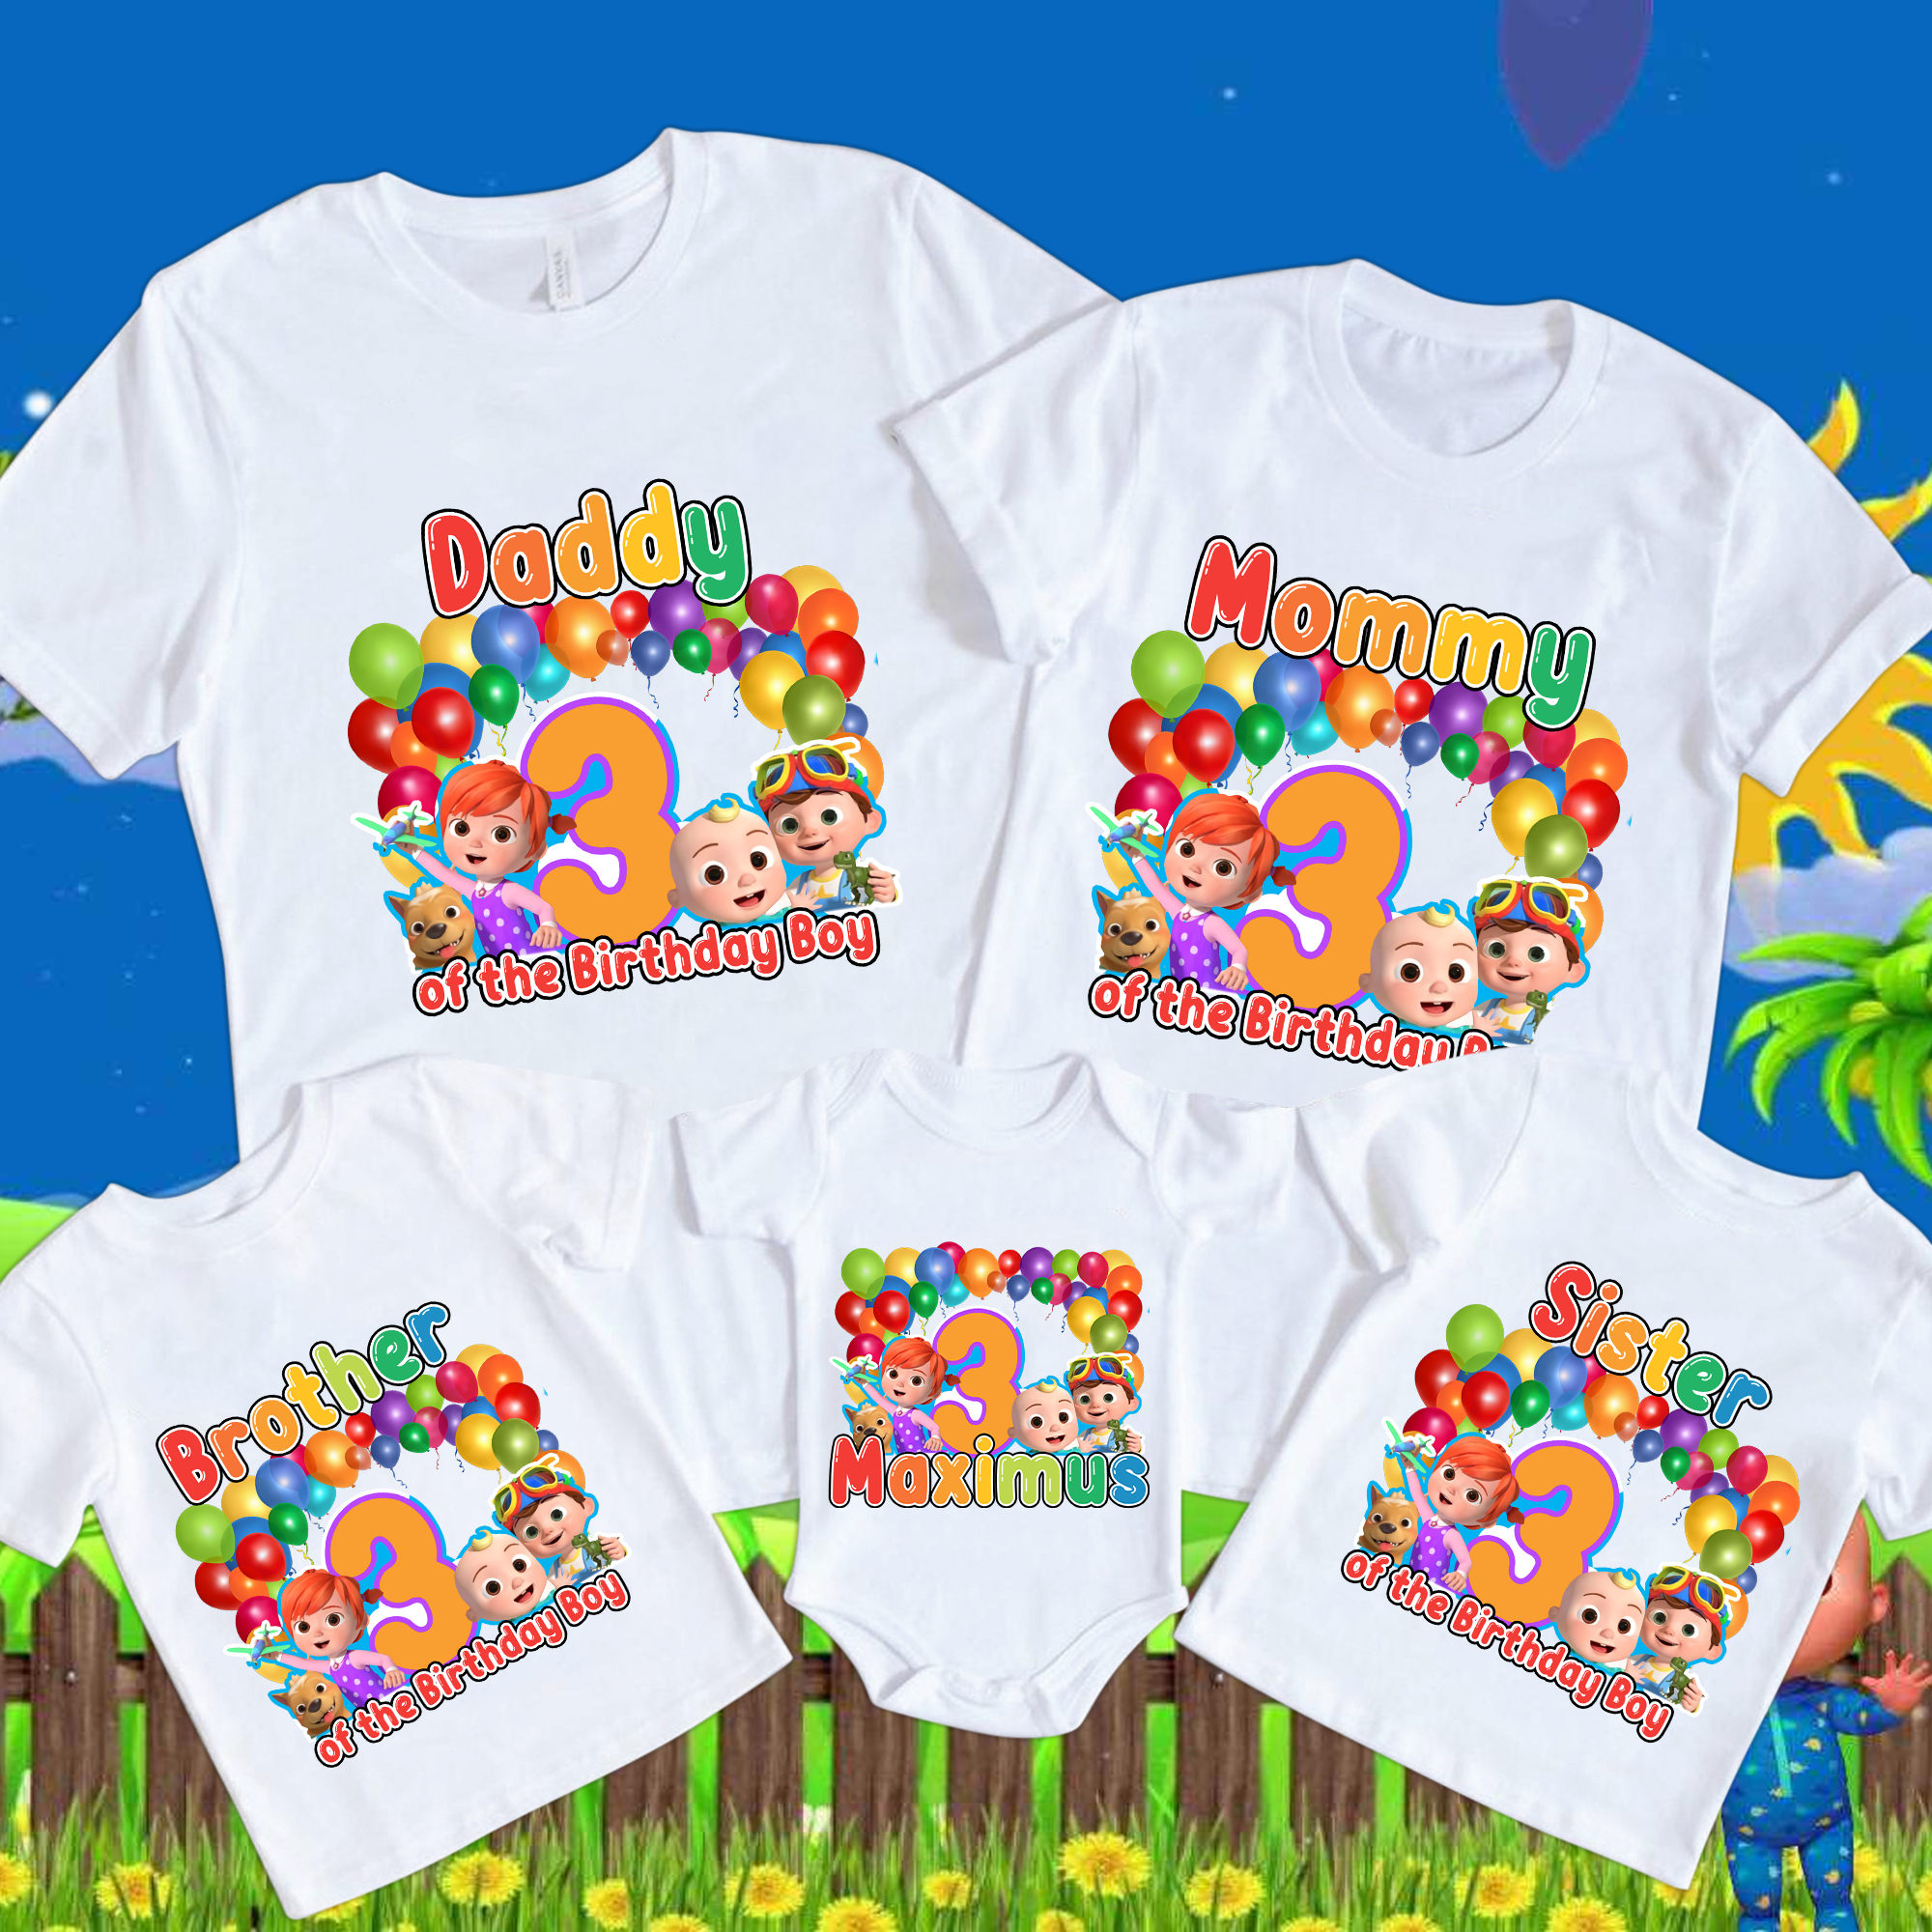 Personalized Cocomelon Birthday Shirt,Coco-melon Birthday Shirts, Cocomelon family shirts, Cocomelon Party Family matching shirt